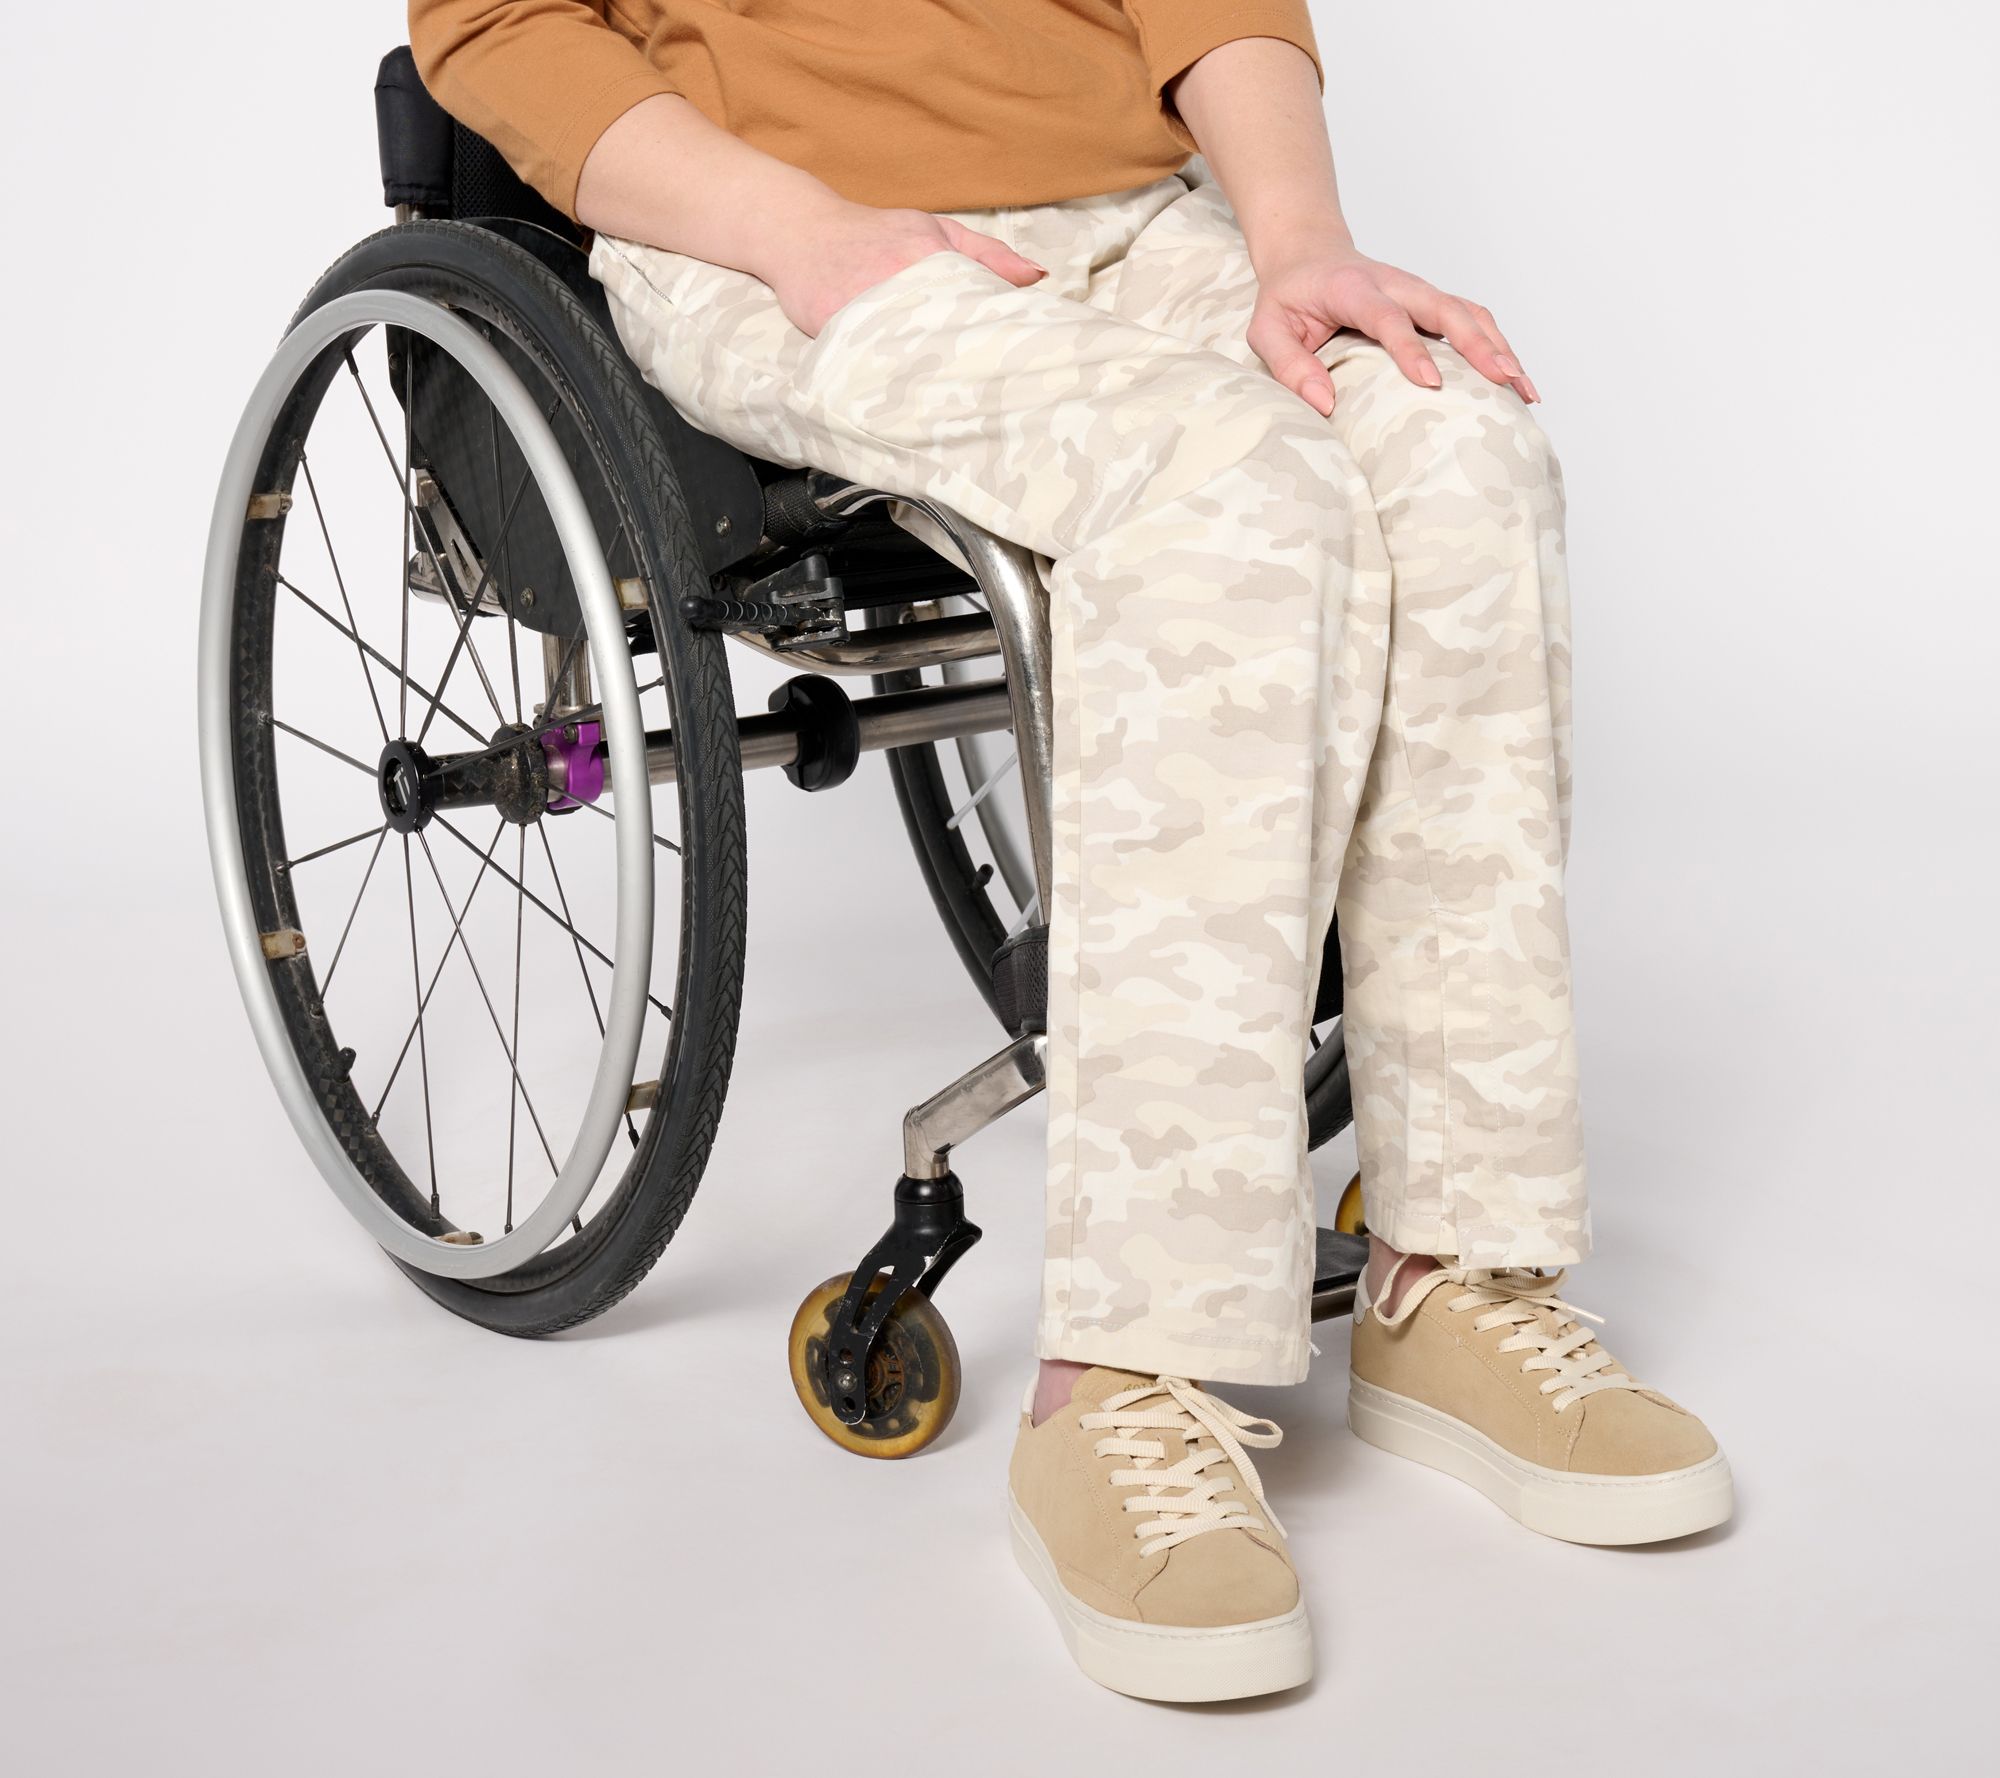 What Makes EasyWear Adaptive Clothing Stand Out